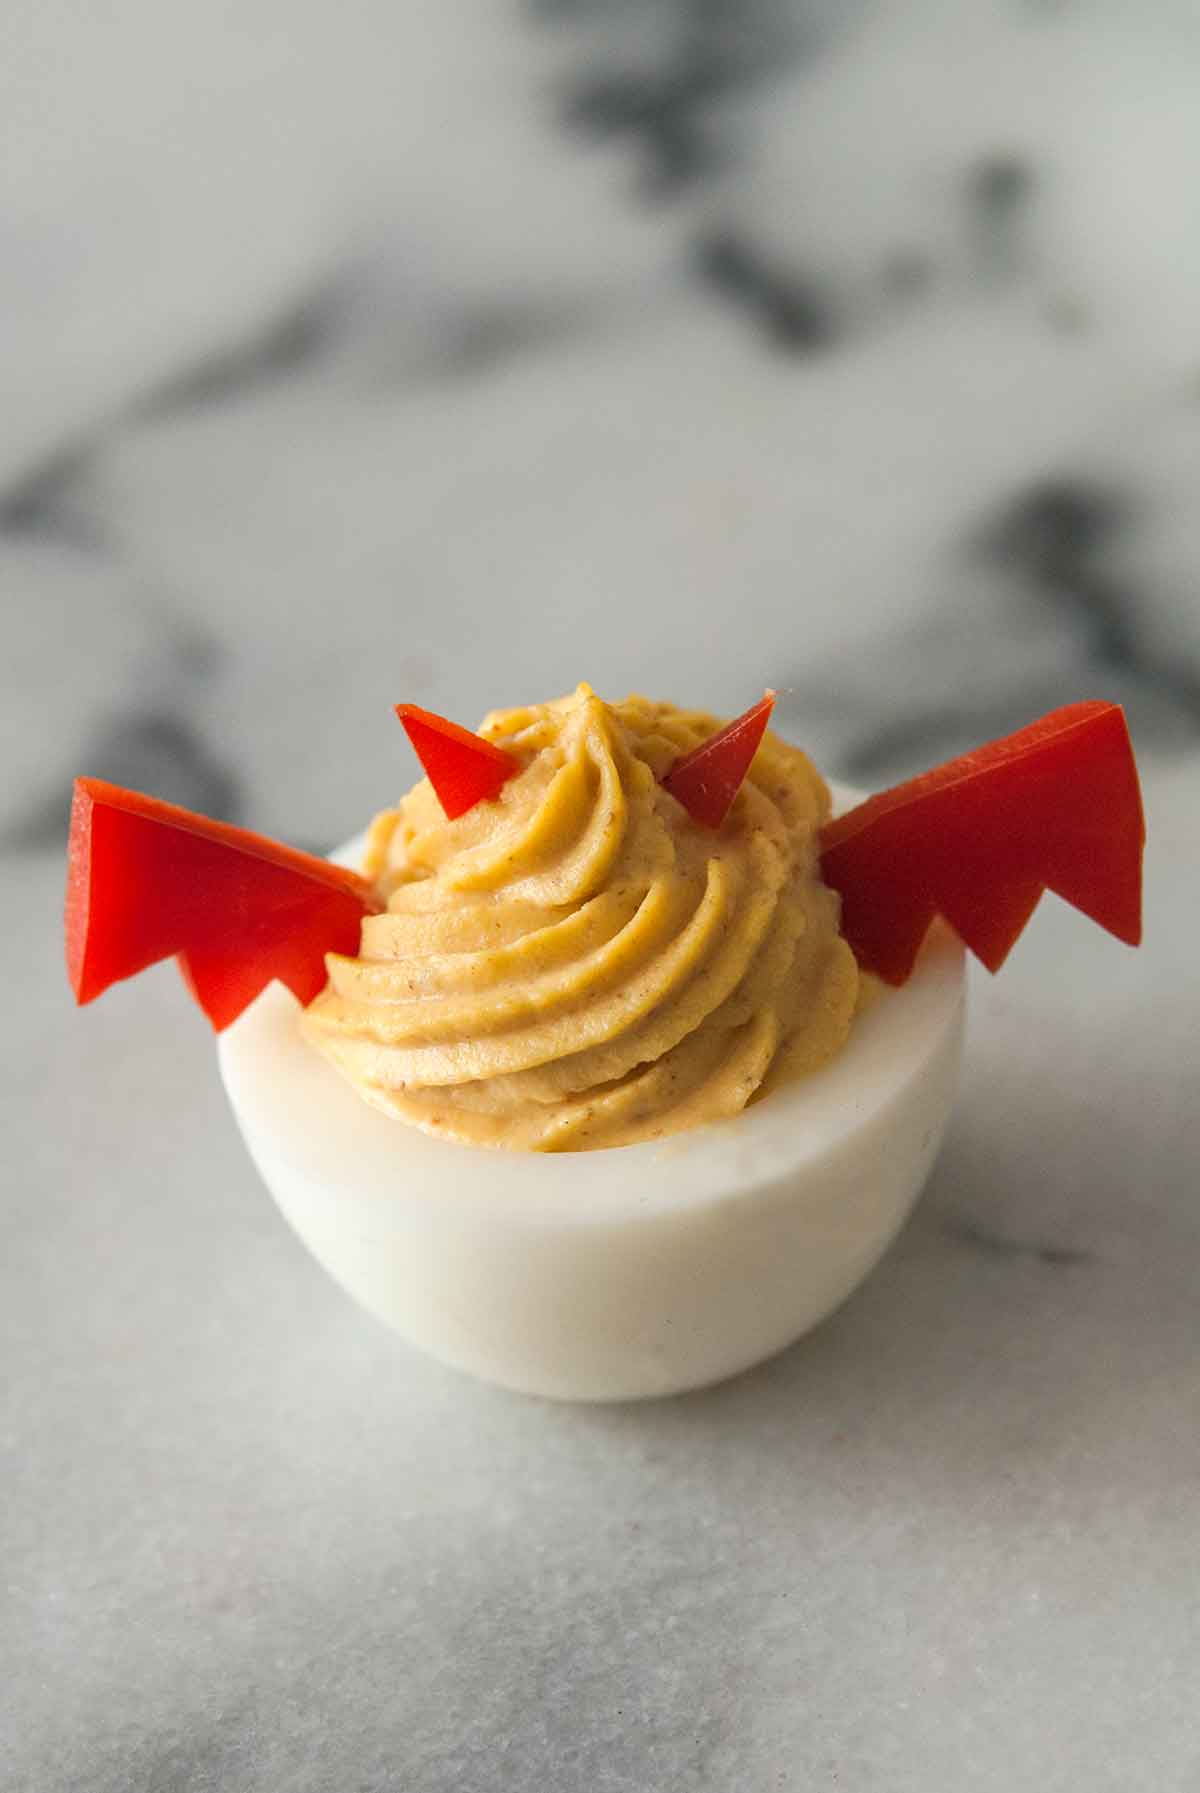 One deviled egg garnished with horns and wings made of red pepper on a marble board.